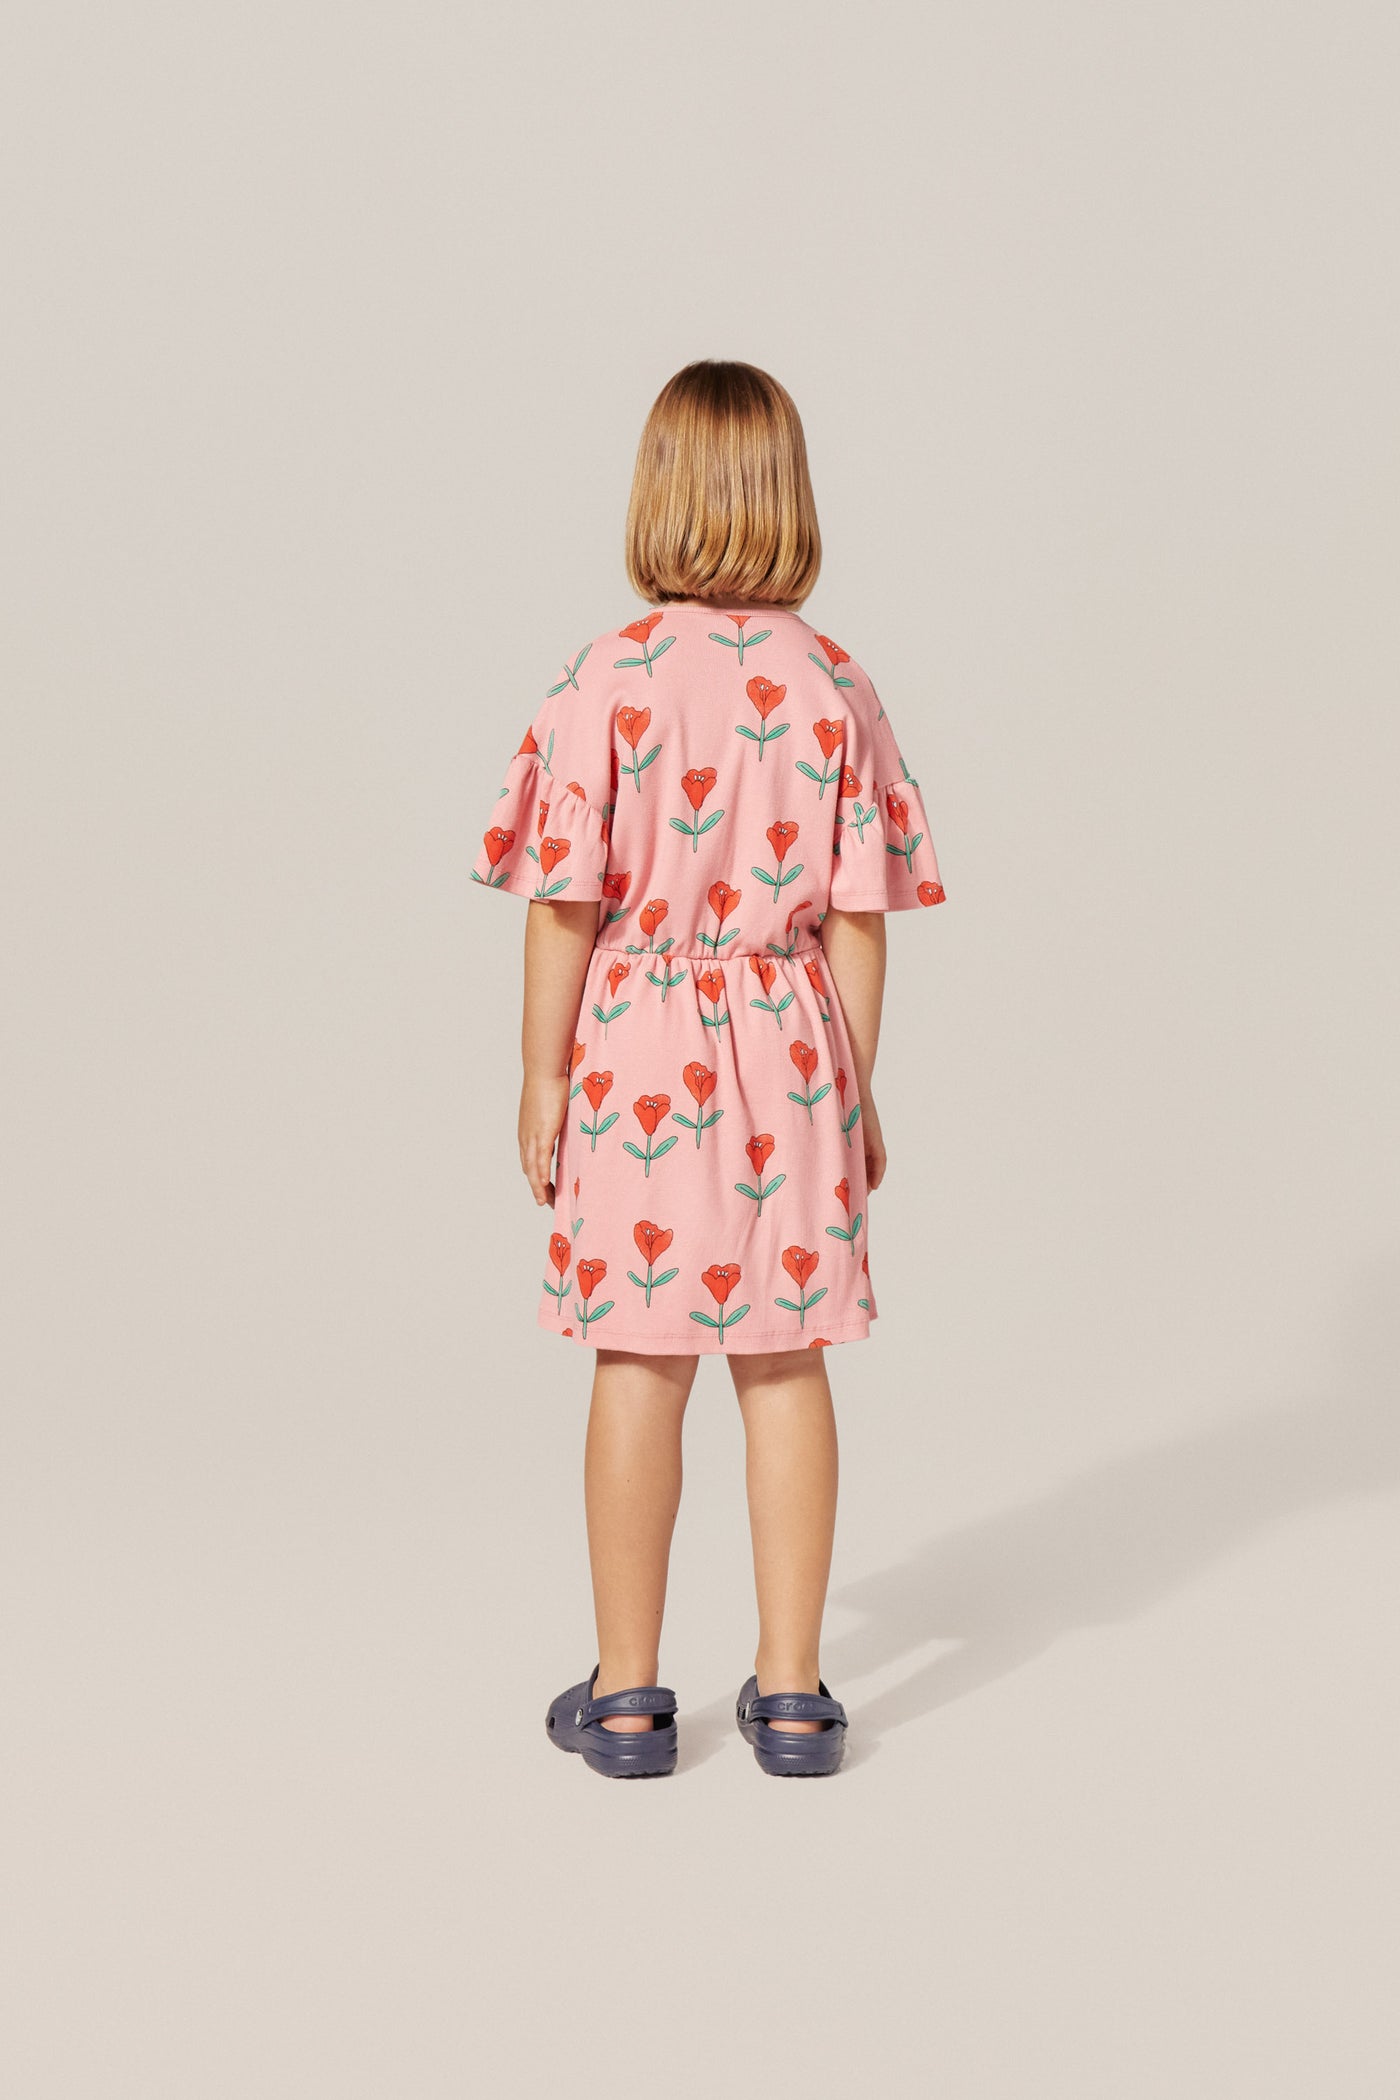 The Campamento Tulips Allover Pink Dress